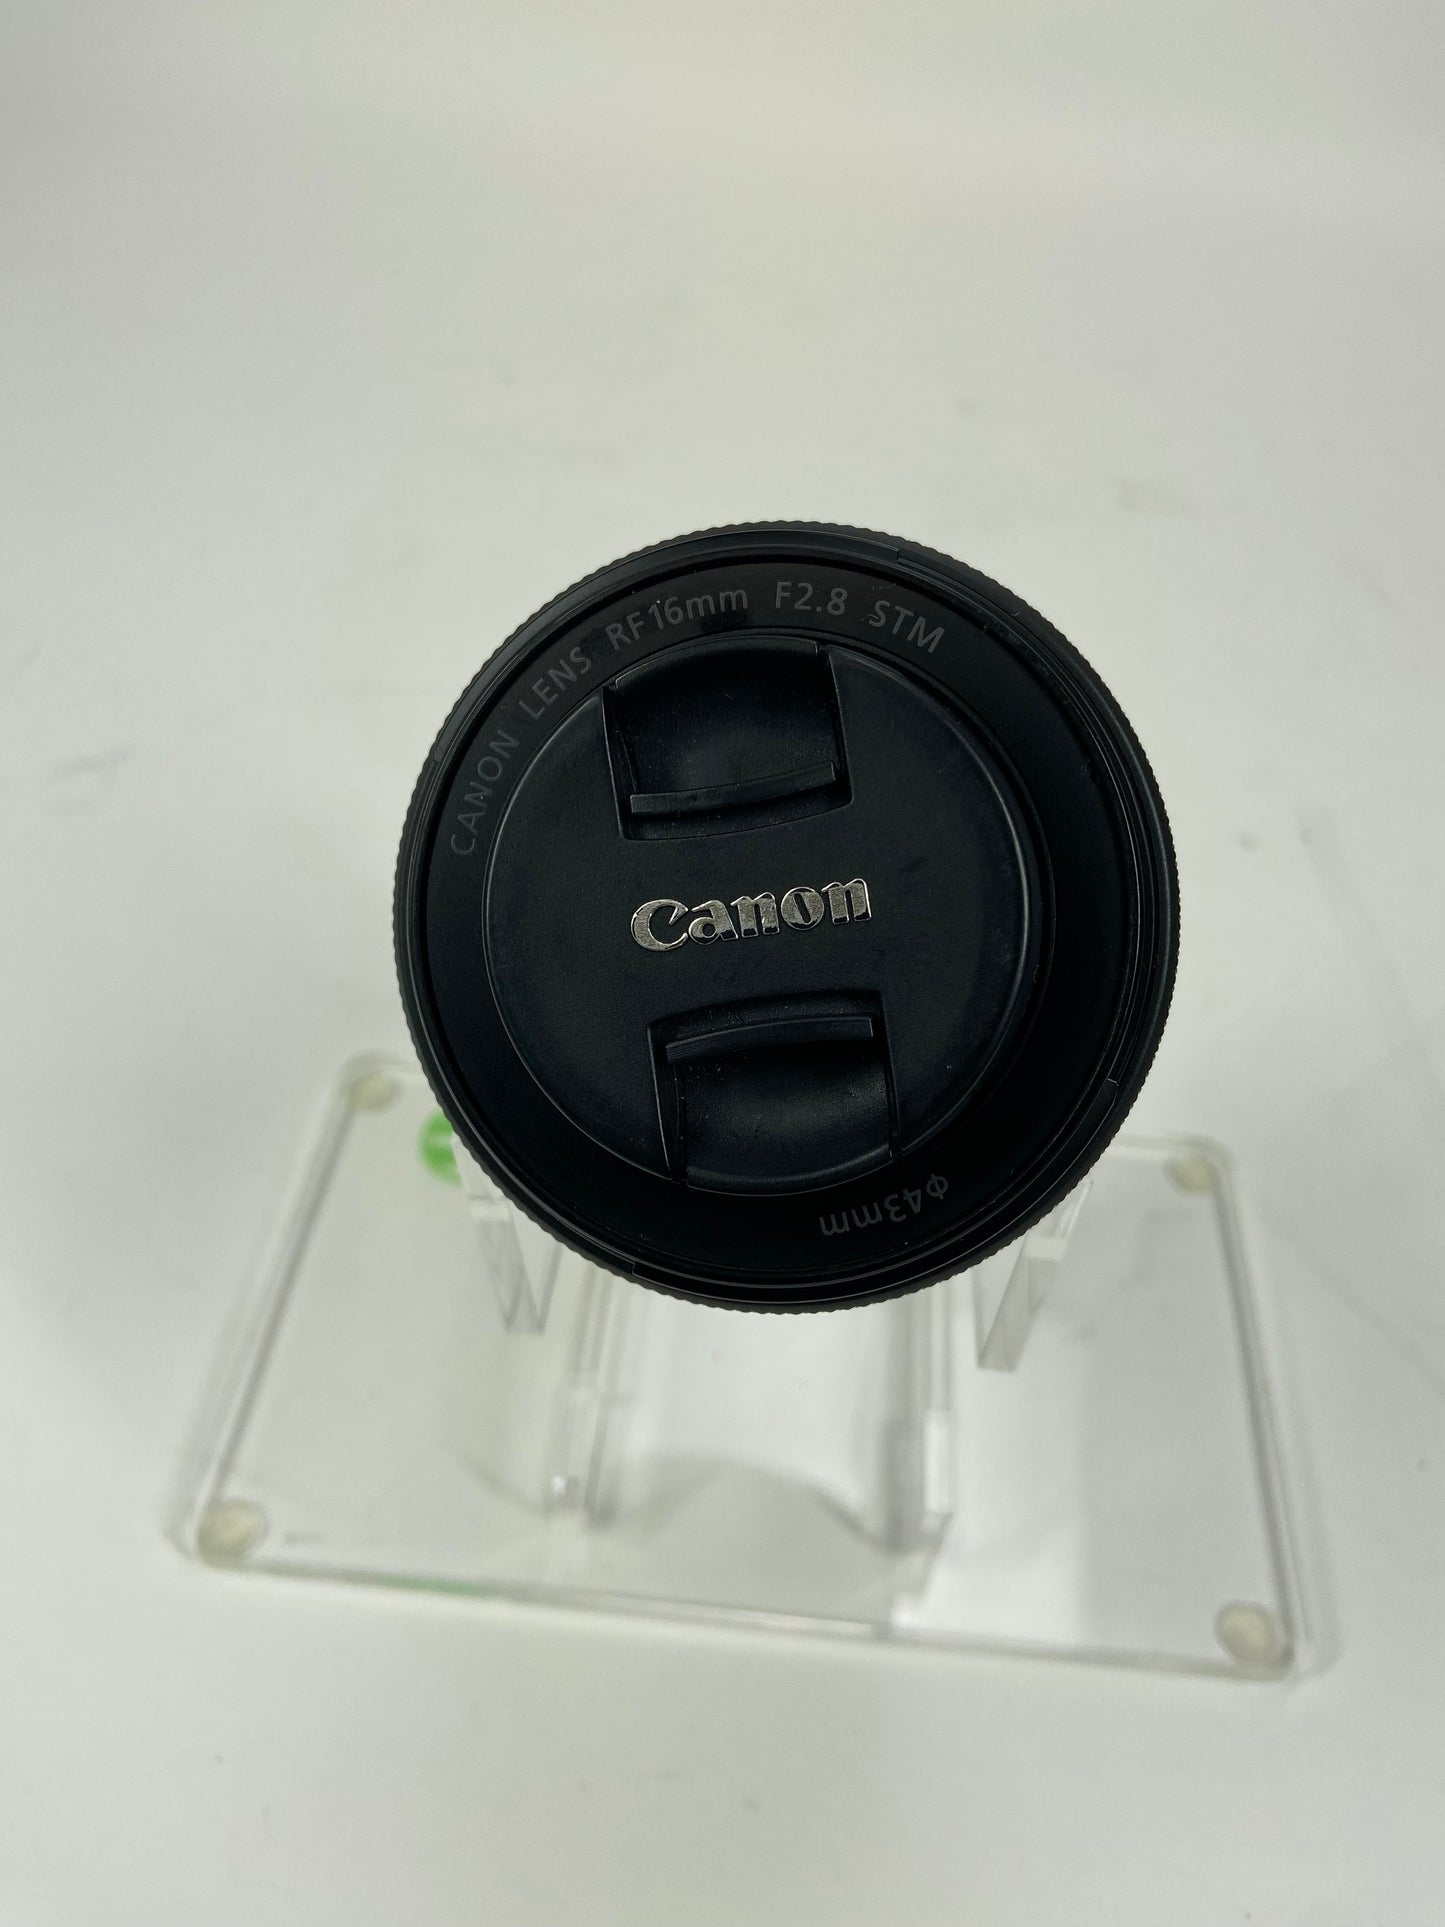 Canon RF 16MM f/2.8 STM Ultra Wide Angle Lens-Black